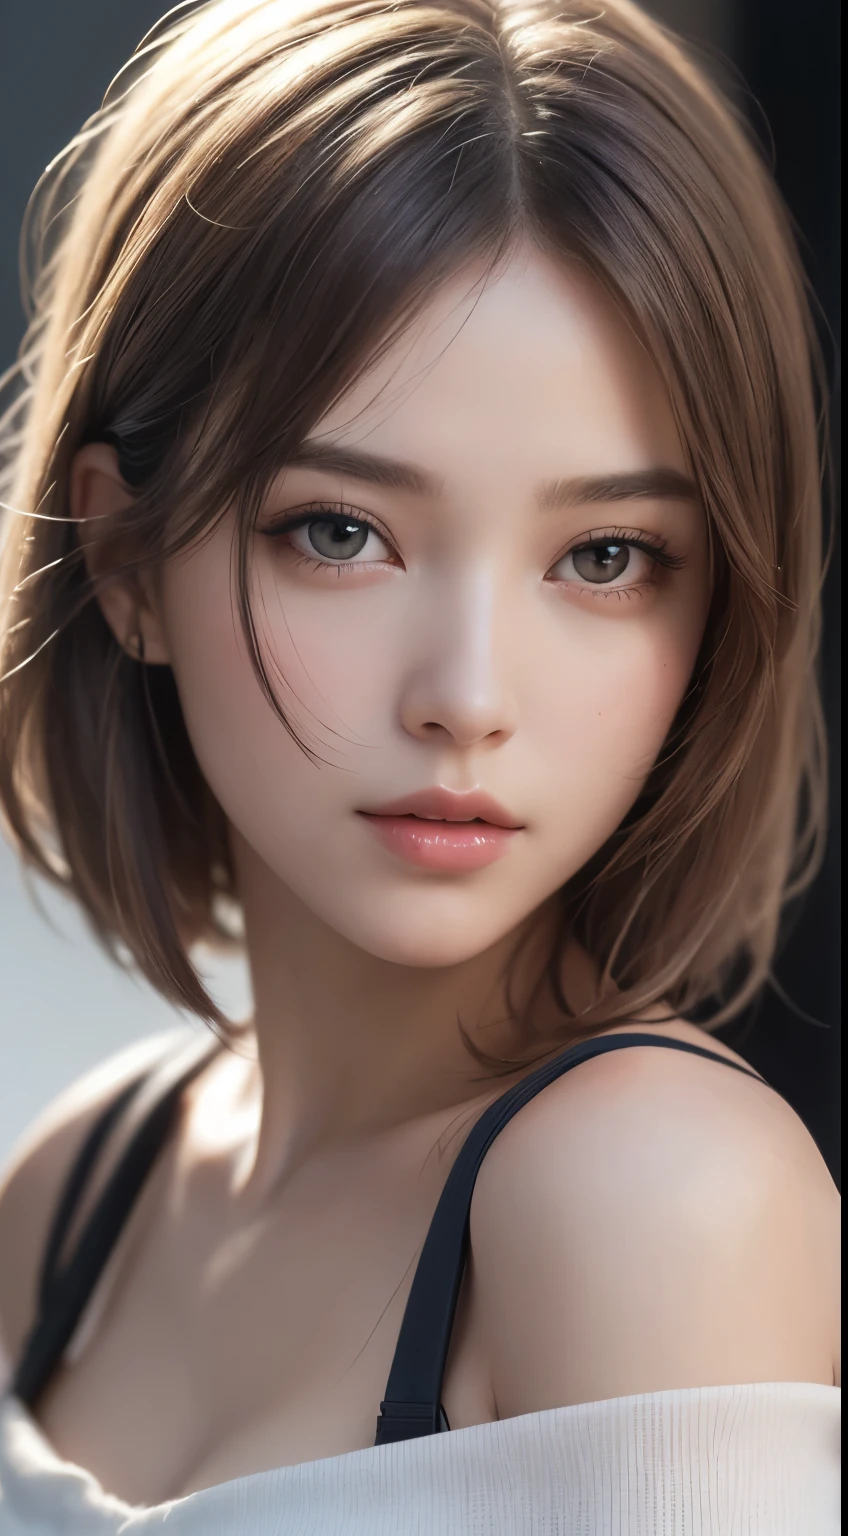 1girl, Extremely cute, amazing face and eyes, (extremely detailed beautiful face), (Ultra realistic), (highly detailed eyes, highly detailed hair, highly detailed face, highly detailed plump lips), (off shoulder), breasts, upper body, caute smile, (best quality:1.4), Raw photo, (realistic, photo-realistic:1.37), professional photography, cinematic light, Best quality, Masterpiece, (Realistic:1.2), 1 girl, Detailed face, Beautiful eyeasterpiece:1.2, Best quality), (fine detailed beautiful eyes: 1.2), (Extremely detailed Cg Unity 8K wallpaper, Masterpiece, Best quality, Ultra-detailed, Best shadow), (Detailed background), (Beautiful detailed face, Beautiful detailed eyes), High contrast, (Best illumination, An extremely delicate and beautiful),1girll,((colourful paint splashes on transparent background, Dulux,)), Dynamic Angle, beautiful detailed glow, full bodyesbian, Cowboy shot, White hair, Purple eyes, Best quality, Masterpiece, (Realistic:1.2), lotus flower, Glowing, In the night sky, Full of stars, The is very detailed, Ultra-high resolution, Ultra-high quality, (photograph:1.2)、(photorealistic:1.3)、(masterpiece:1.3)、(Highest image quality:1.4)、ultra high resolution、(detailed eyes)、(detailed facial features)、(Detailed garment features)、8K resolution、solo focus、30 year old mature woman、small face、no makeup、Detailed beautiful eyes、bangs、dark brown hair、short cut hair、(realistic skin)、beautiful skin、charming、ultra high resolution、Super realistic、High definition、Camisa branca aberta,middlebre、small breasts、bust B cup、small breasts、cool beauty、